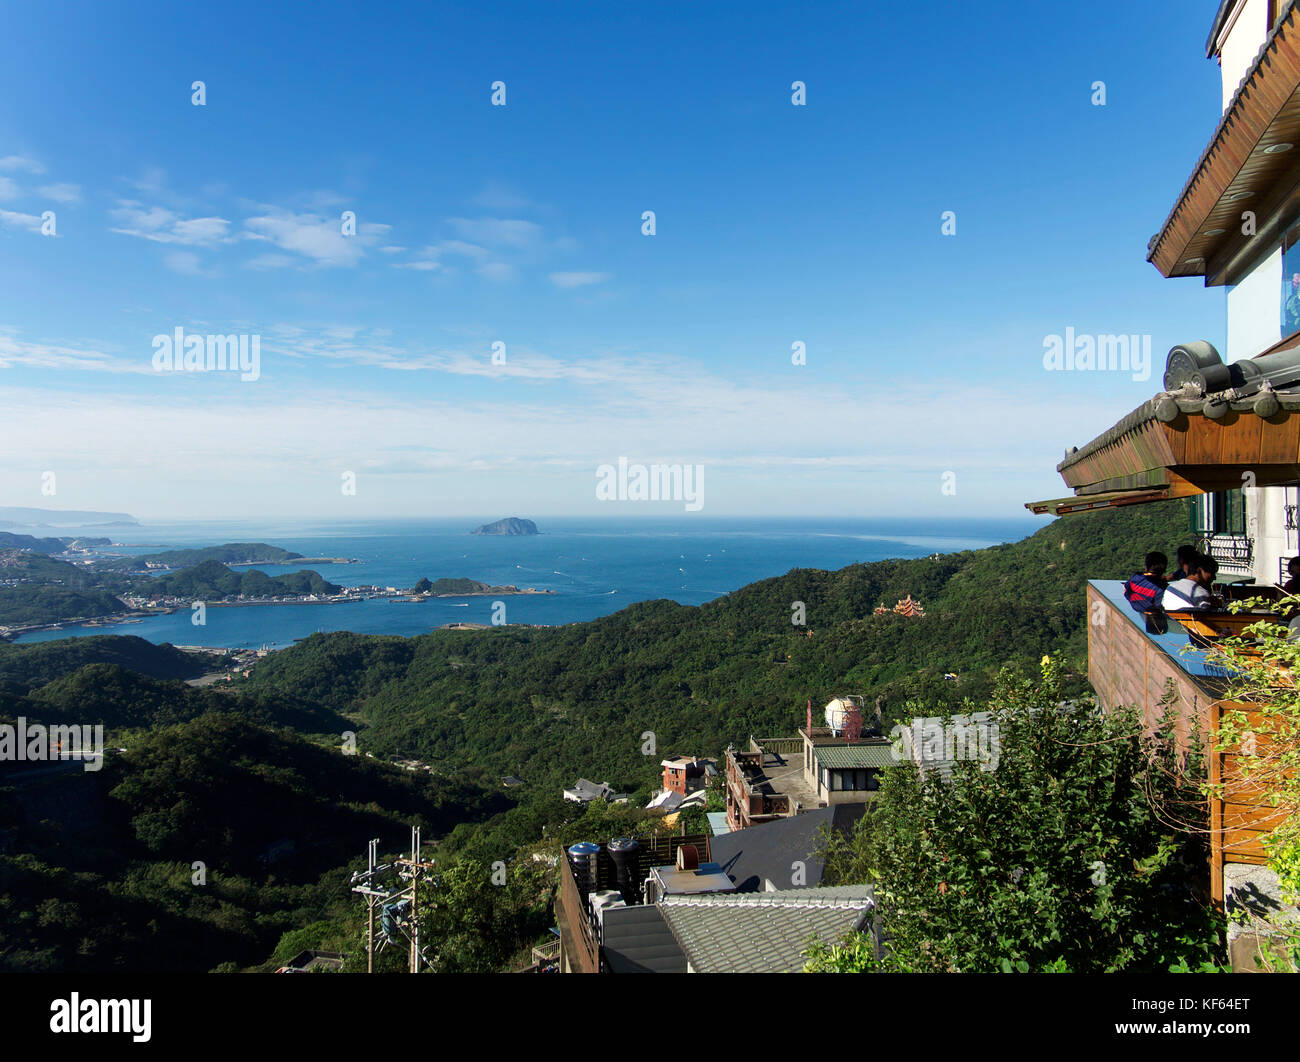 View of Shen-ao Fishing Harbor from Jiufen Scenic Area and Tea Houses at Jiufen Old Street, Ruifang District, Taiwan Stock Photo